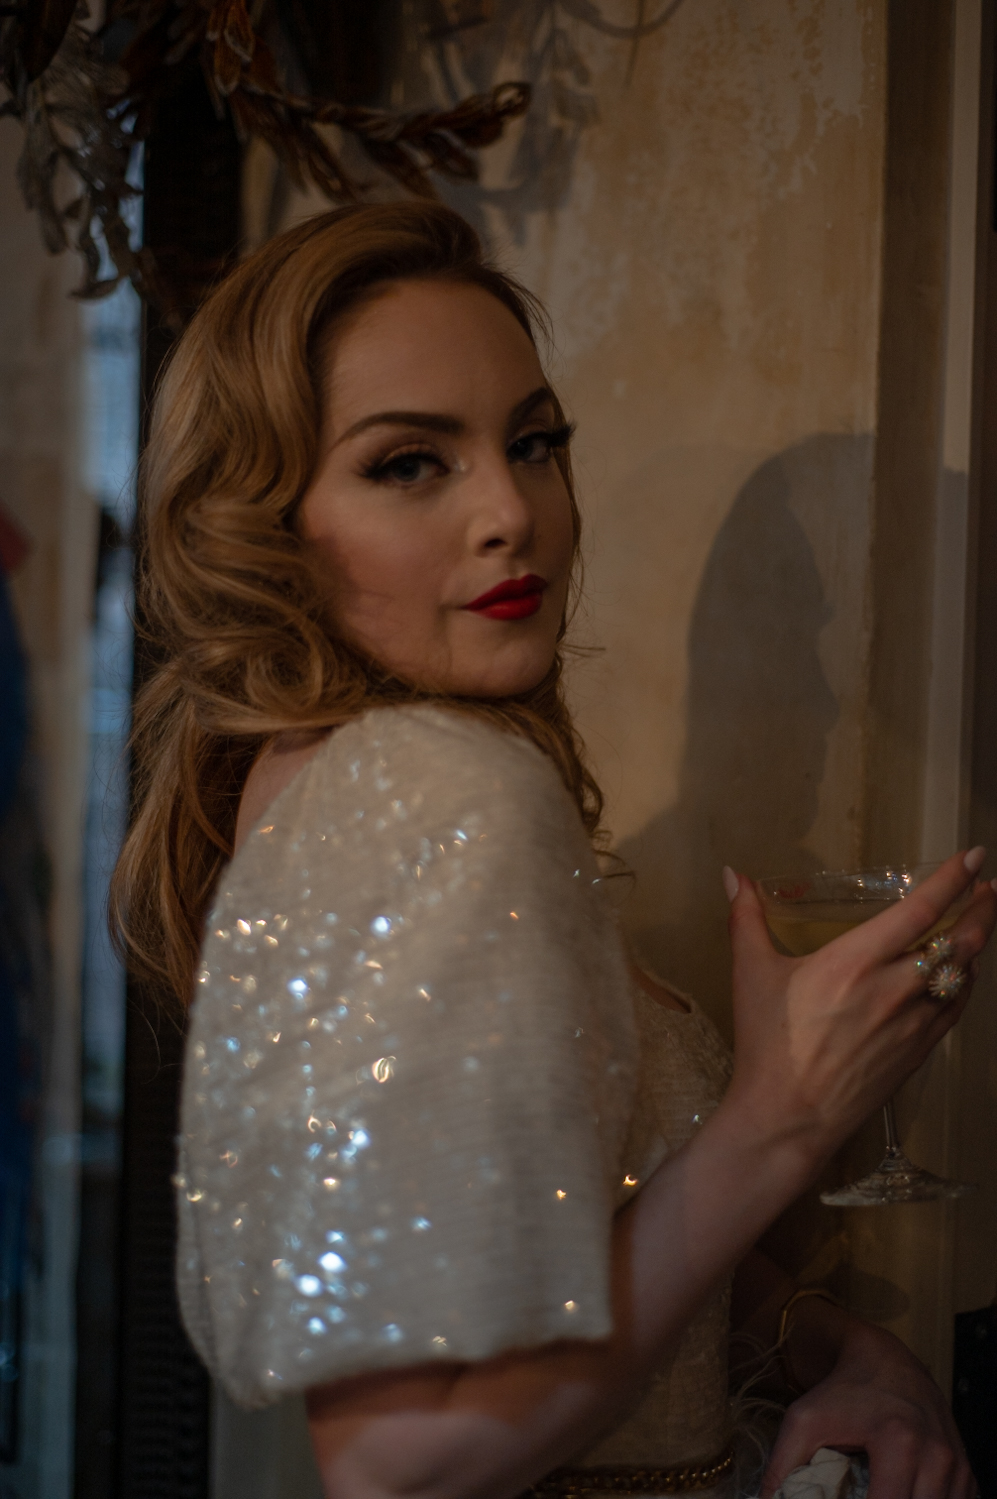 Elizabeth Gillies wearing a white sequined dress and holding a martini glass.